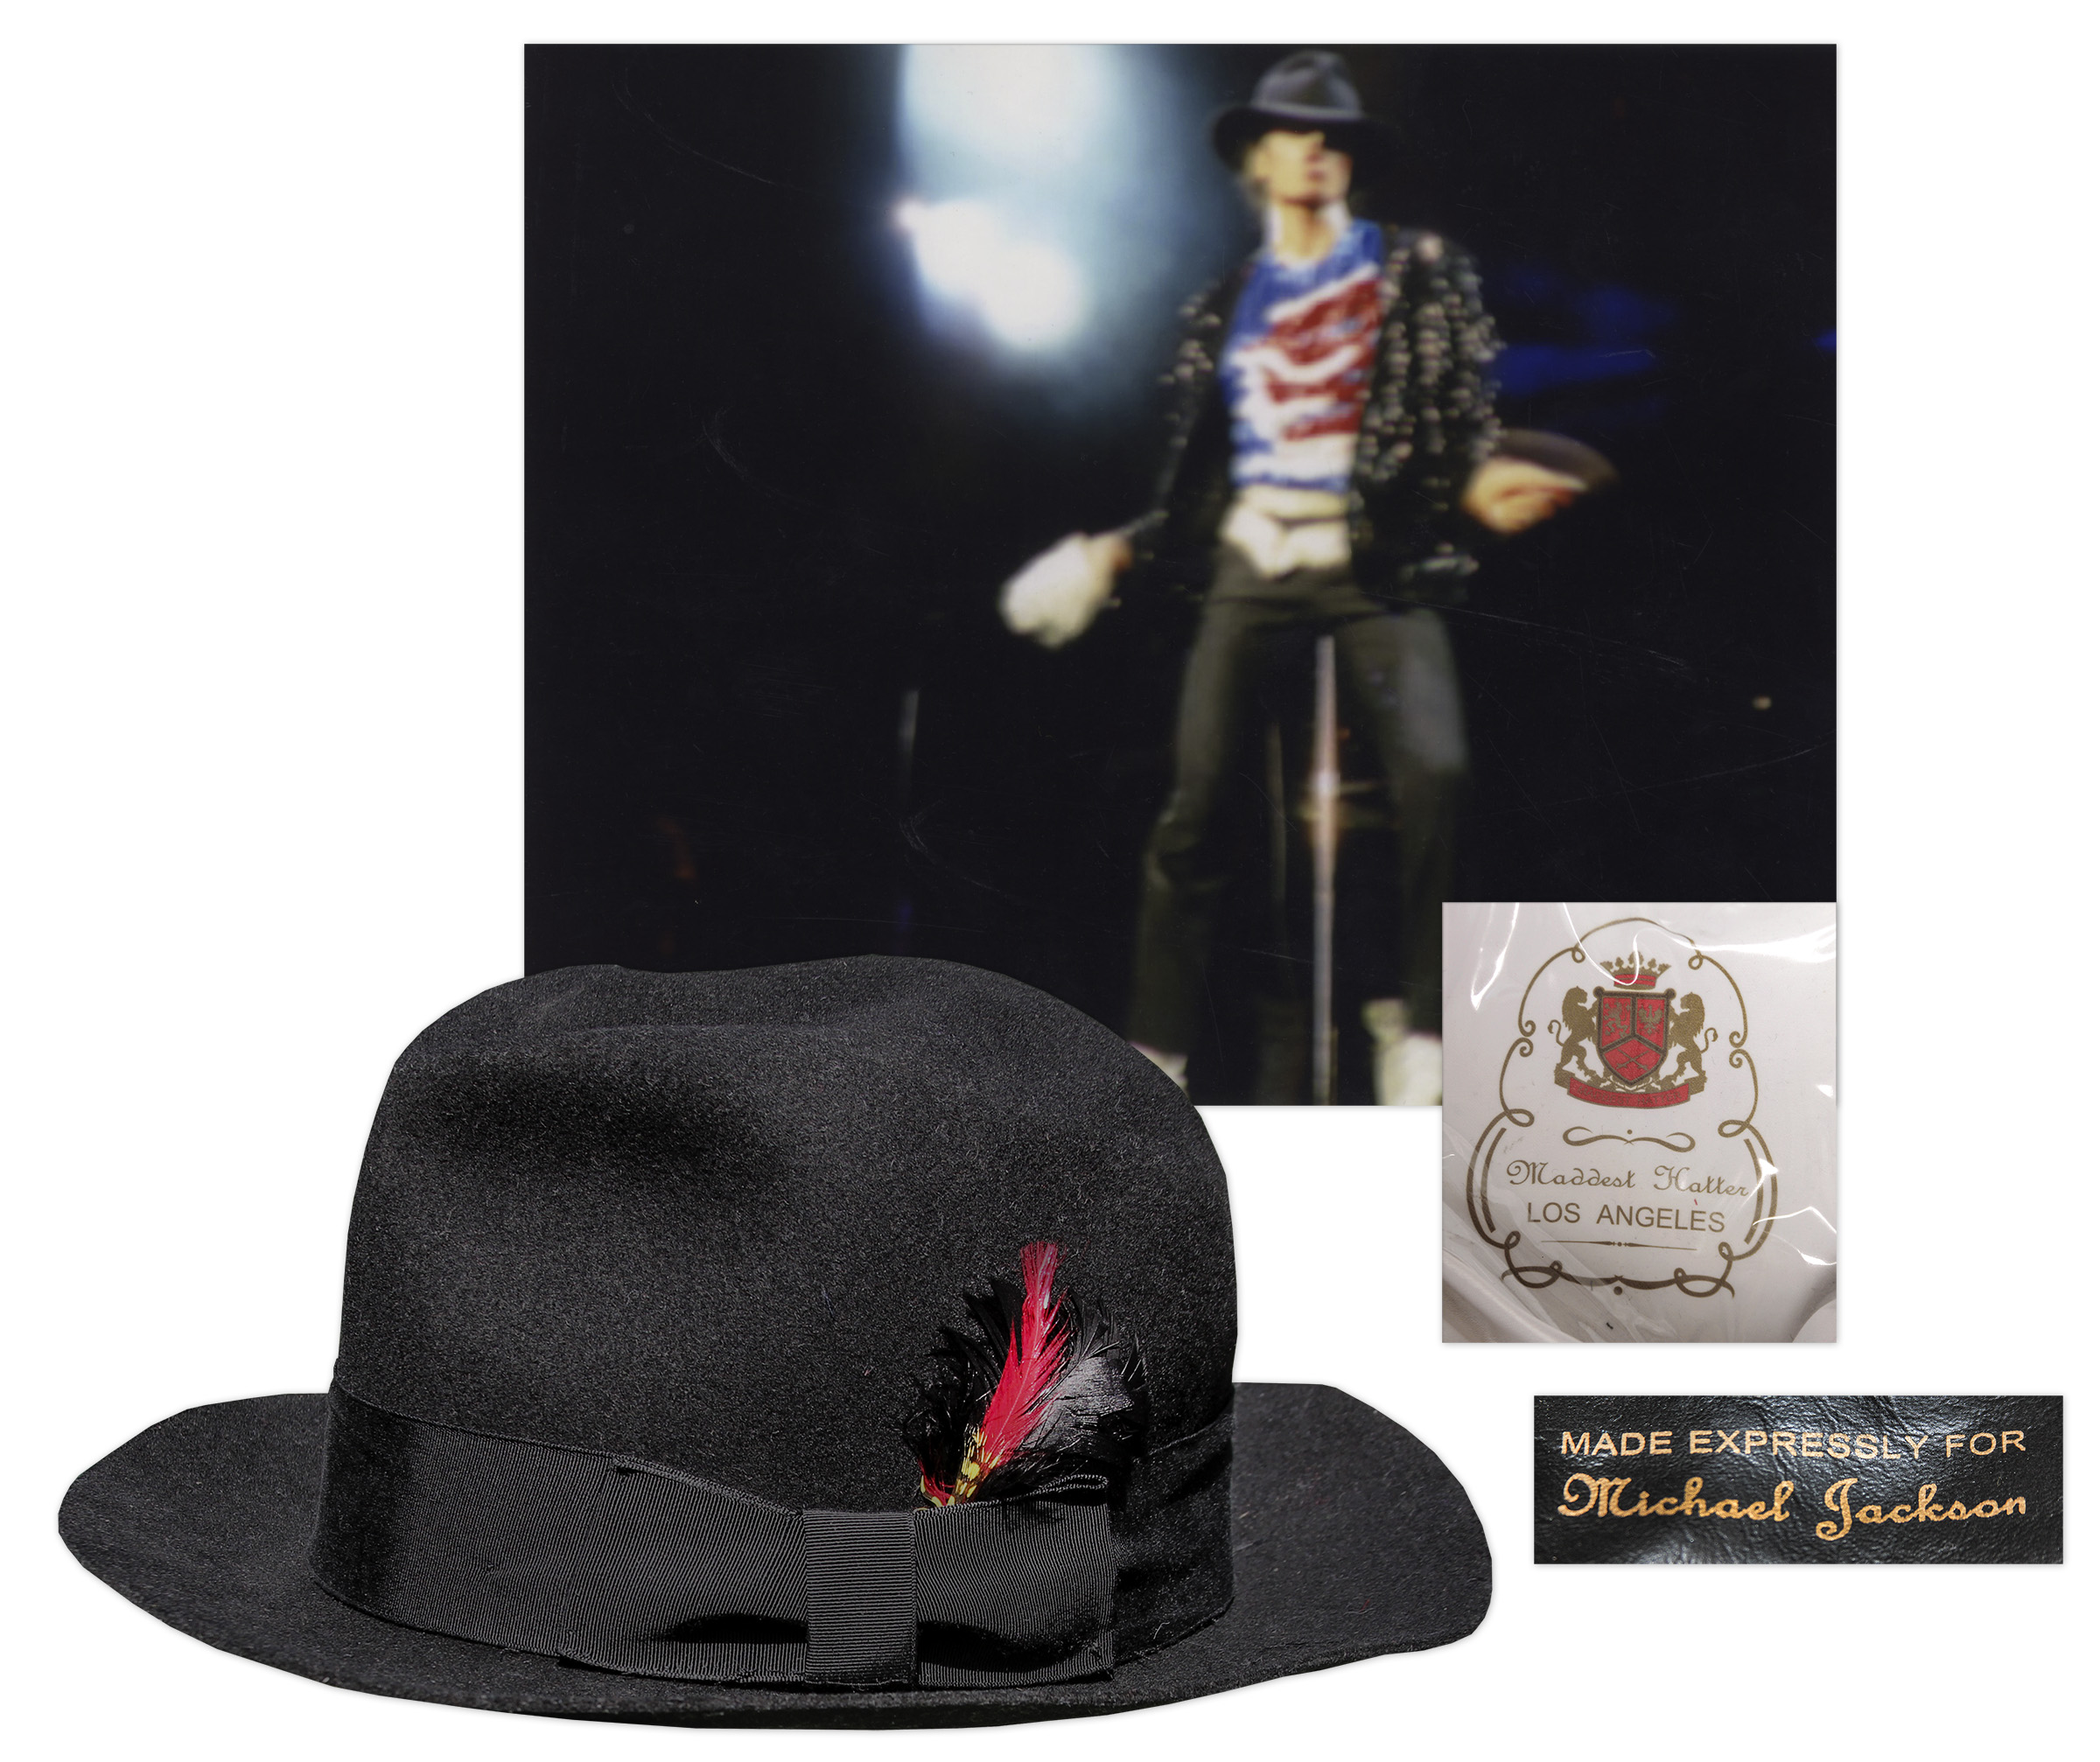 Michael Jackson Fedora worn by him Michael Jackson's Famous Stage-Worn Black Fedora -- From 1984 ''Victory'' Tour